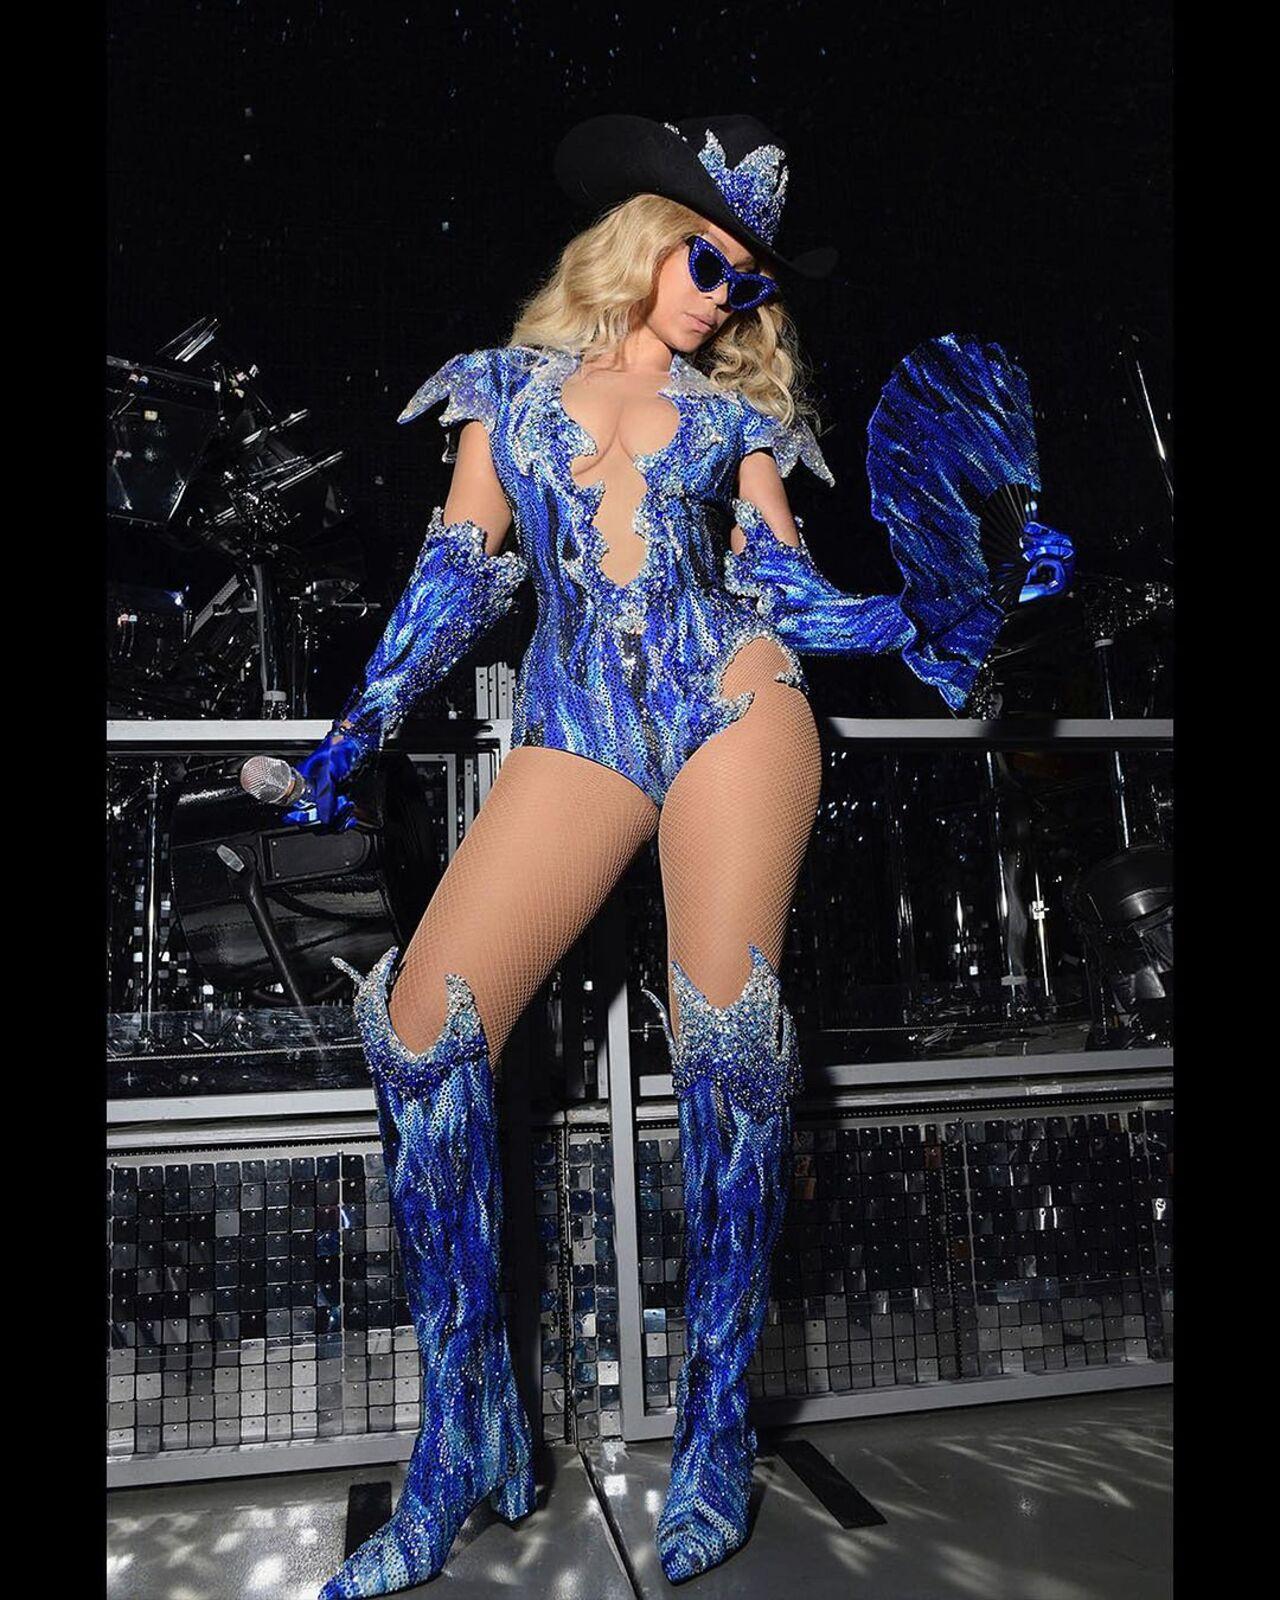 Beyonce doesn't shy away from turning heads, that's for sure! Take a look at this ocean design-inspired ombre blue outfit features hues of sky blue, navy blue, deep indigo and ultrmarine. And those spiky boots exude unimaginable sass!